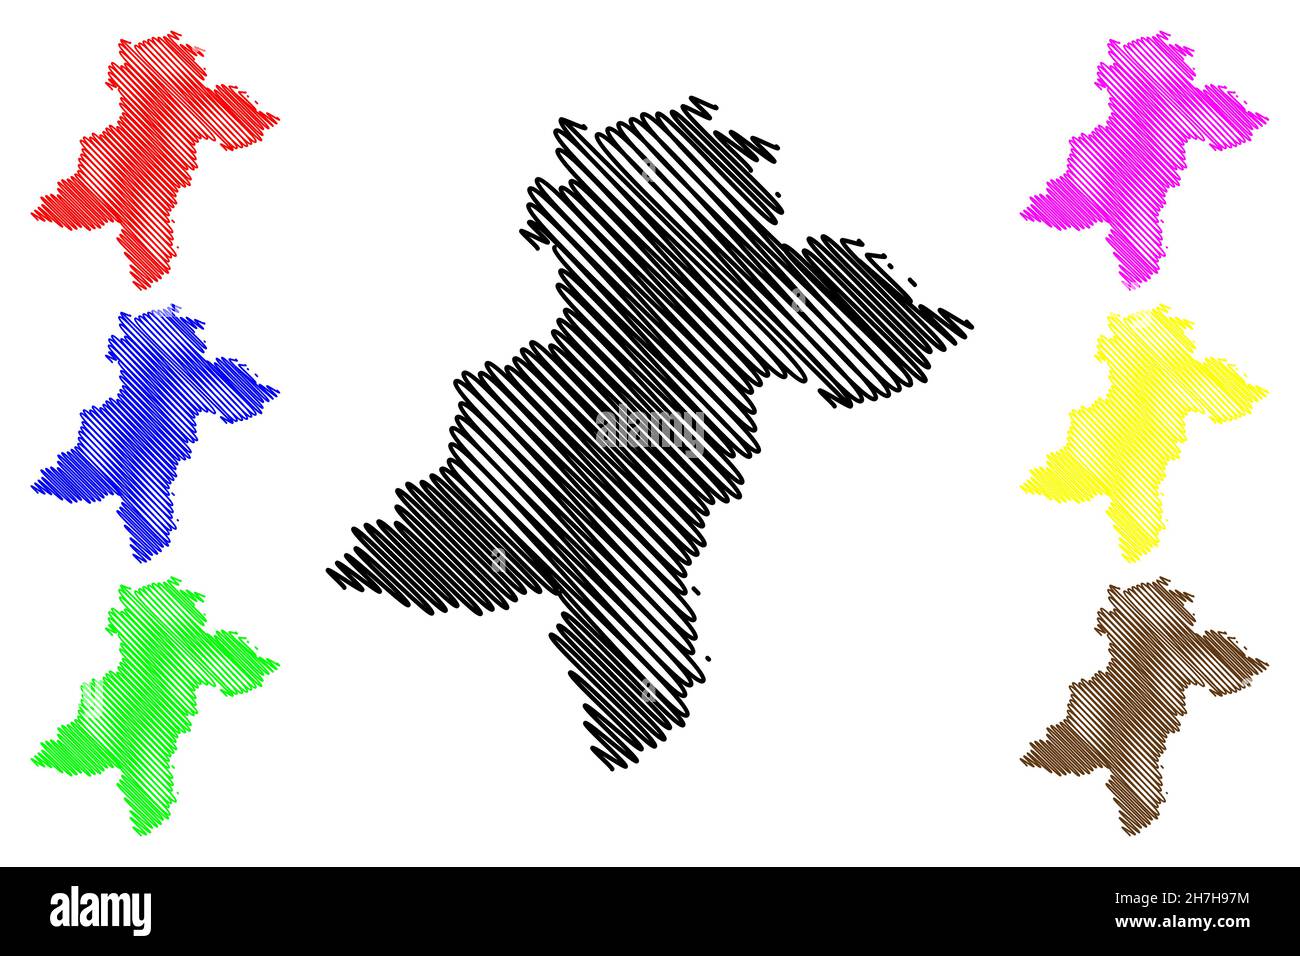 Davanagere district (Karnataka State, Republic of India, Bangalore Division) map vector illustration, scribble sketch Davanagere map Stock Vector